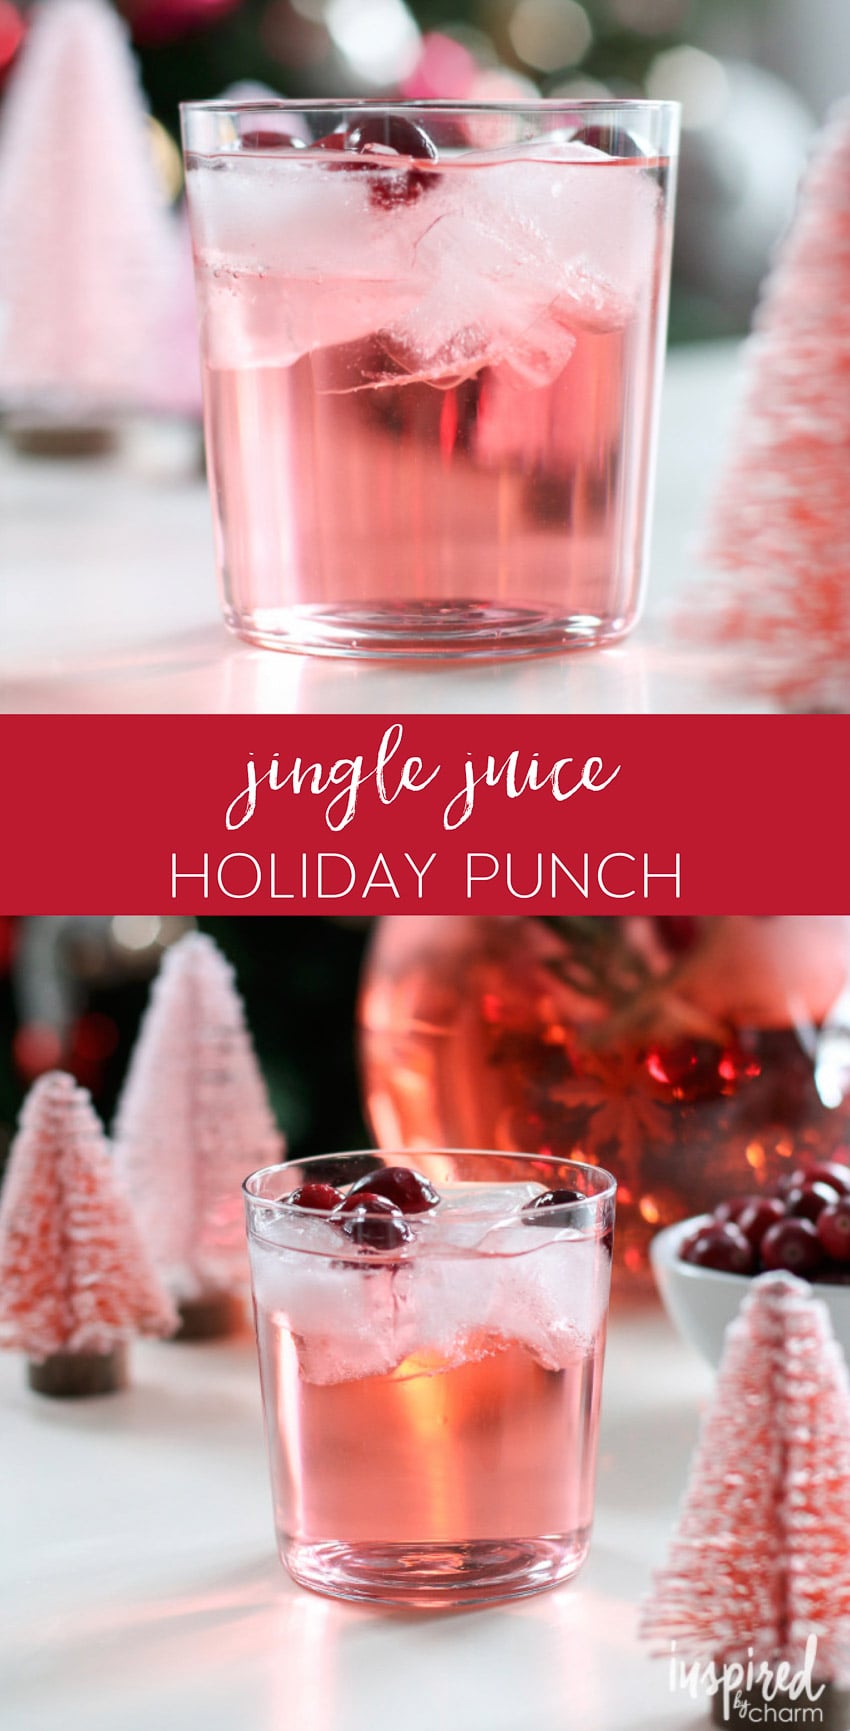 This Jingle Juice Holiday Punch recipe is an easy recipe and a holiday cocktail everyone will love. #holiday #cocktail #recipe #punch #christmas #holidaypunch #easy